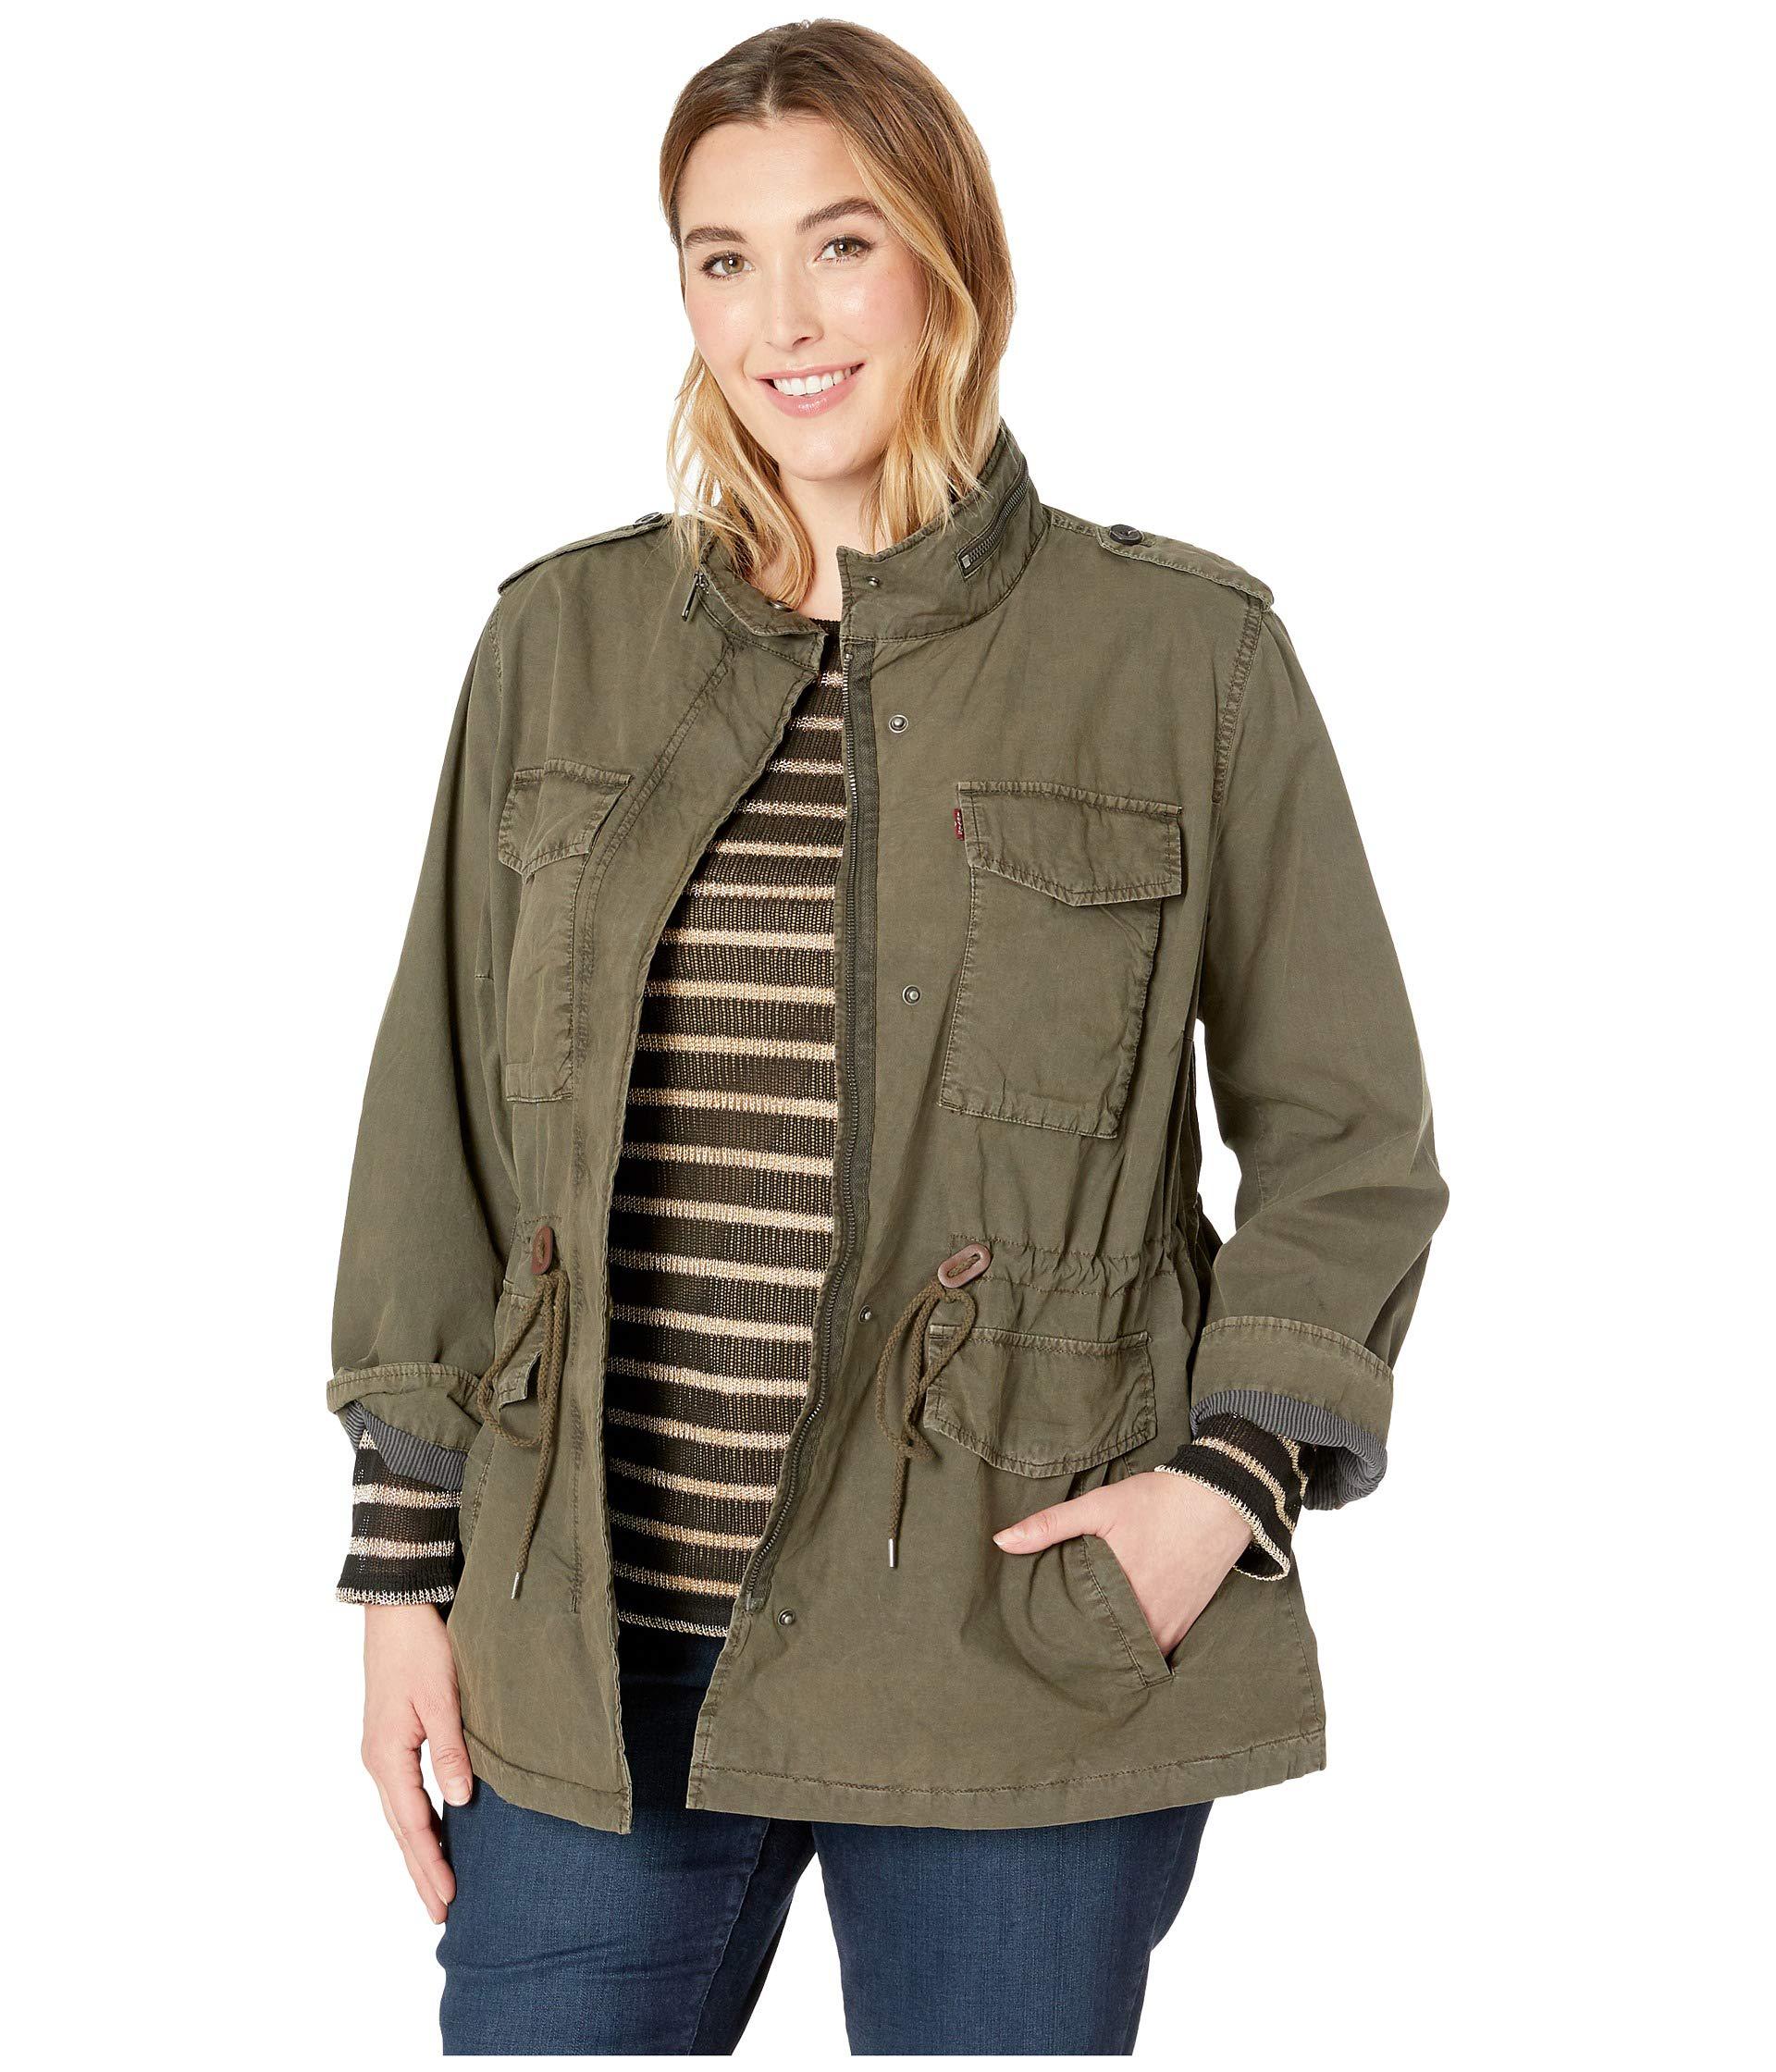 Plus Size Army Green Jacket - Army Military